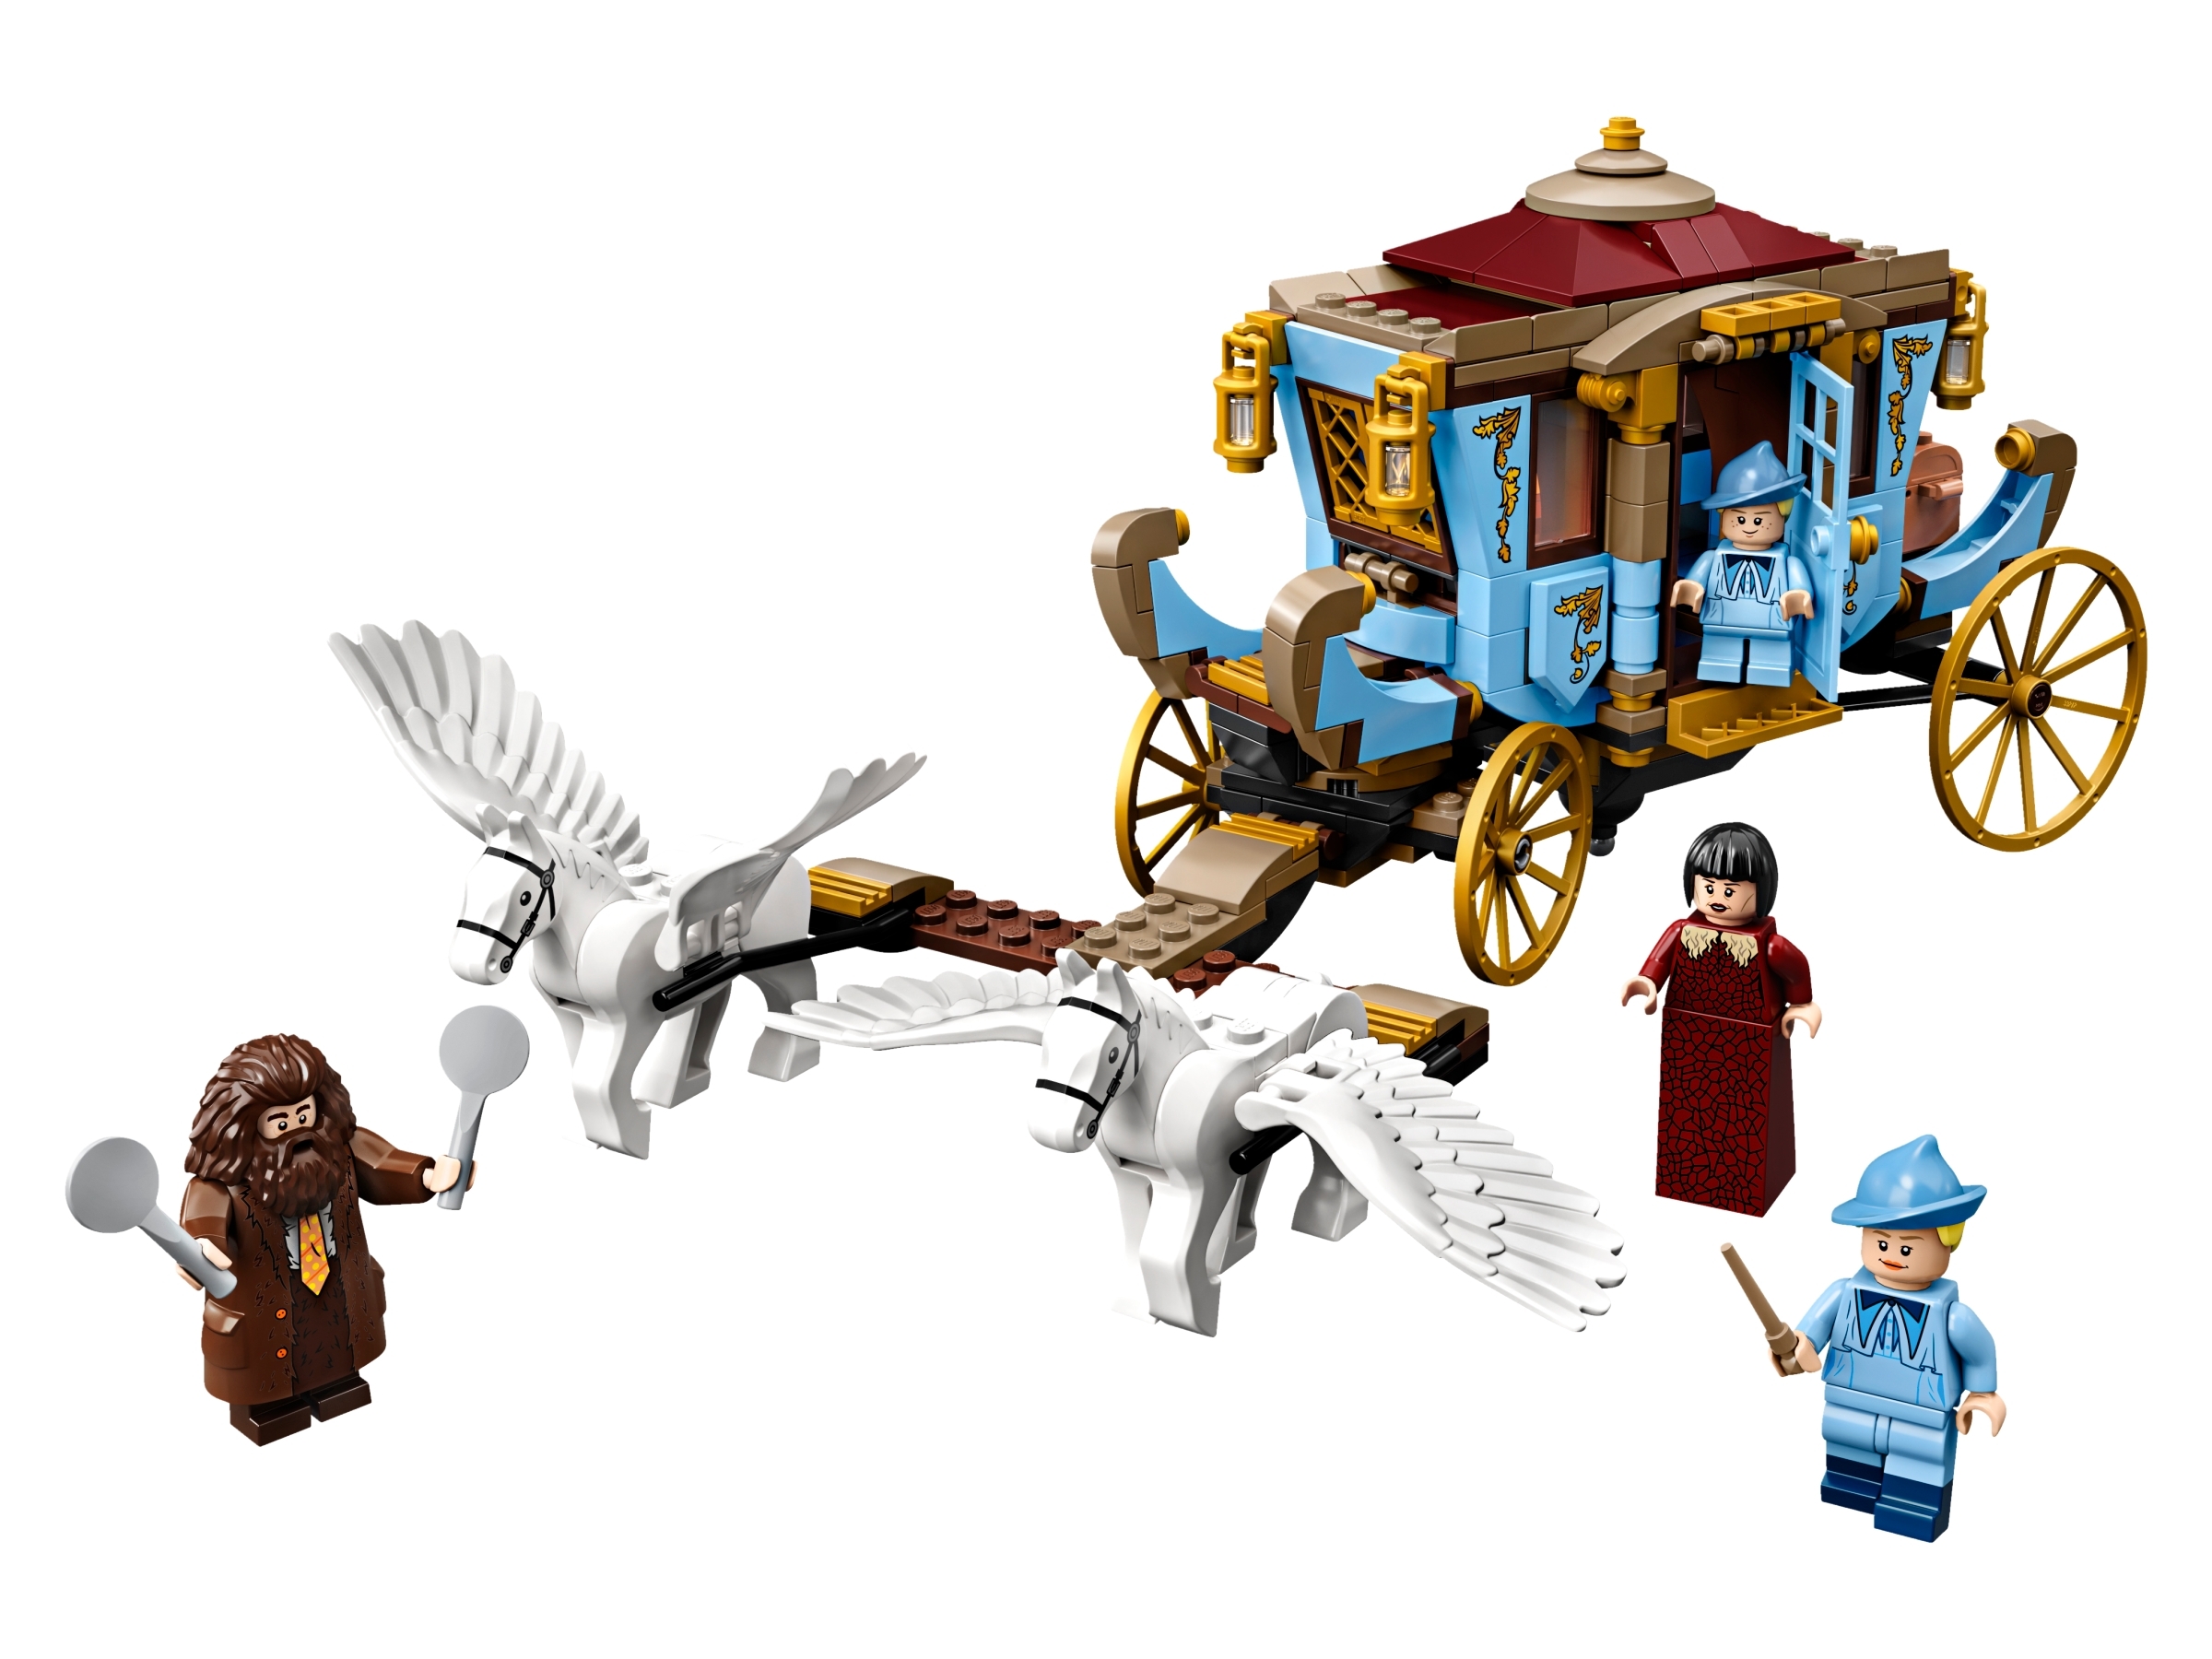 Beauxbatons' Carriage: Arrival at 